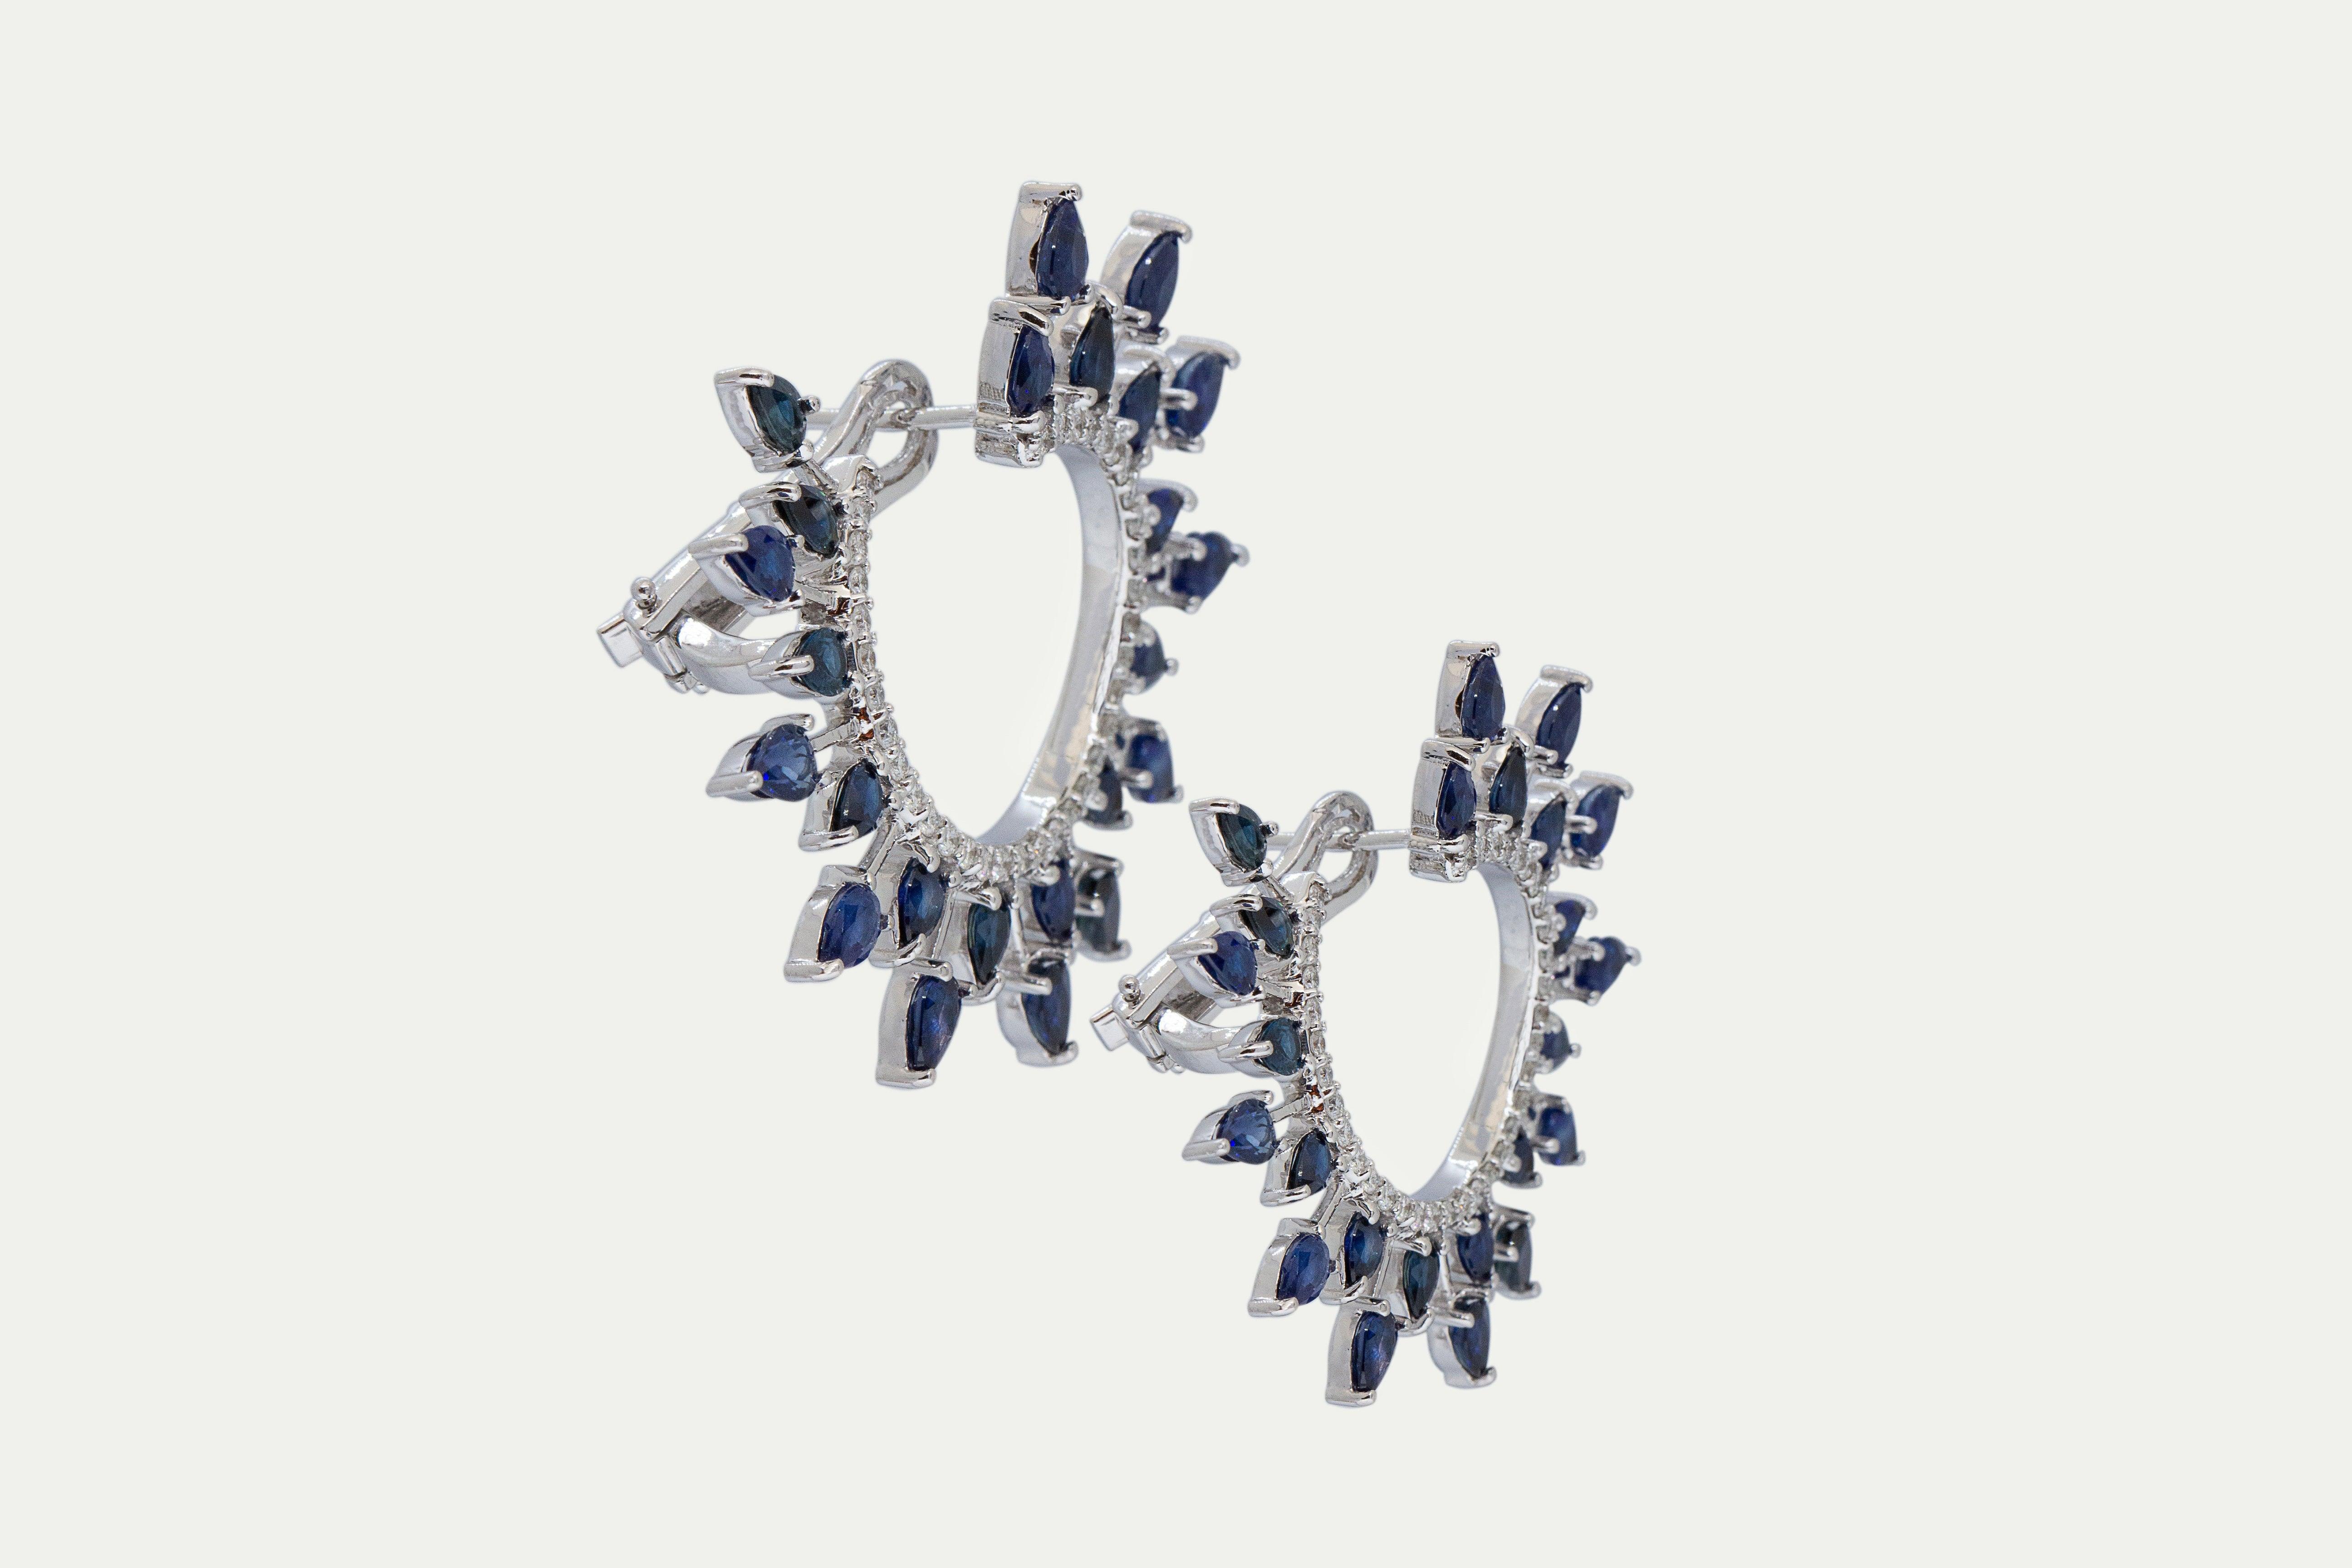 Earrings 18k white gold with 72 round diamonds, Carat total weight 0.96 and 48 blue sapphire stones, Carat total weight 10.36